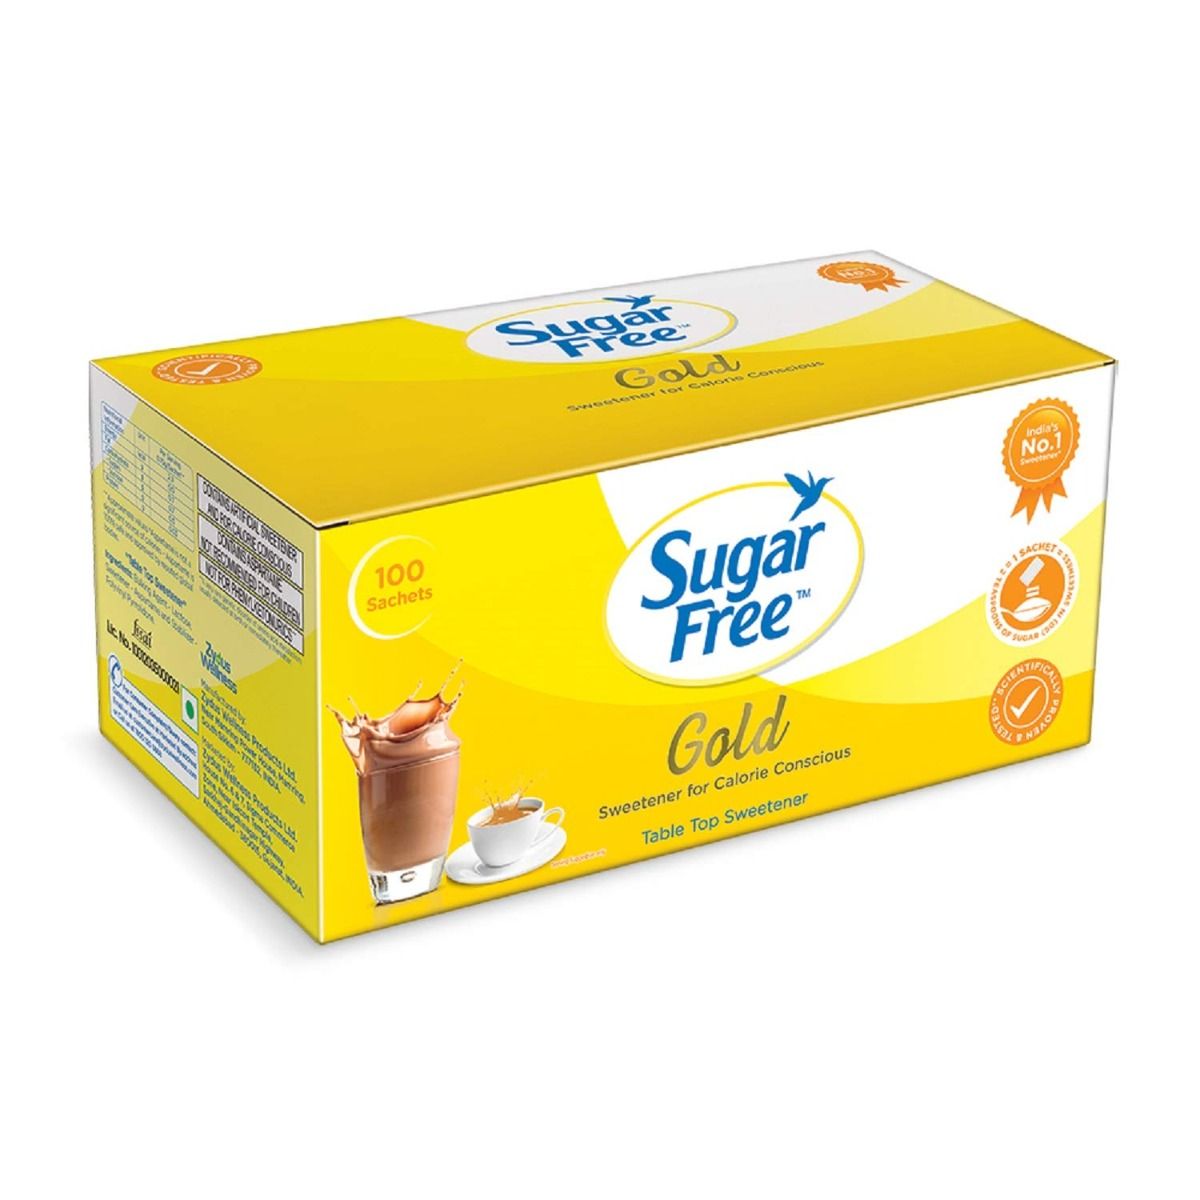 Buy Sugar Free Gold Low Calorie Sugar Substitute, 75 gm (100 sachets x 0.75 gm) Online